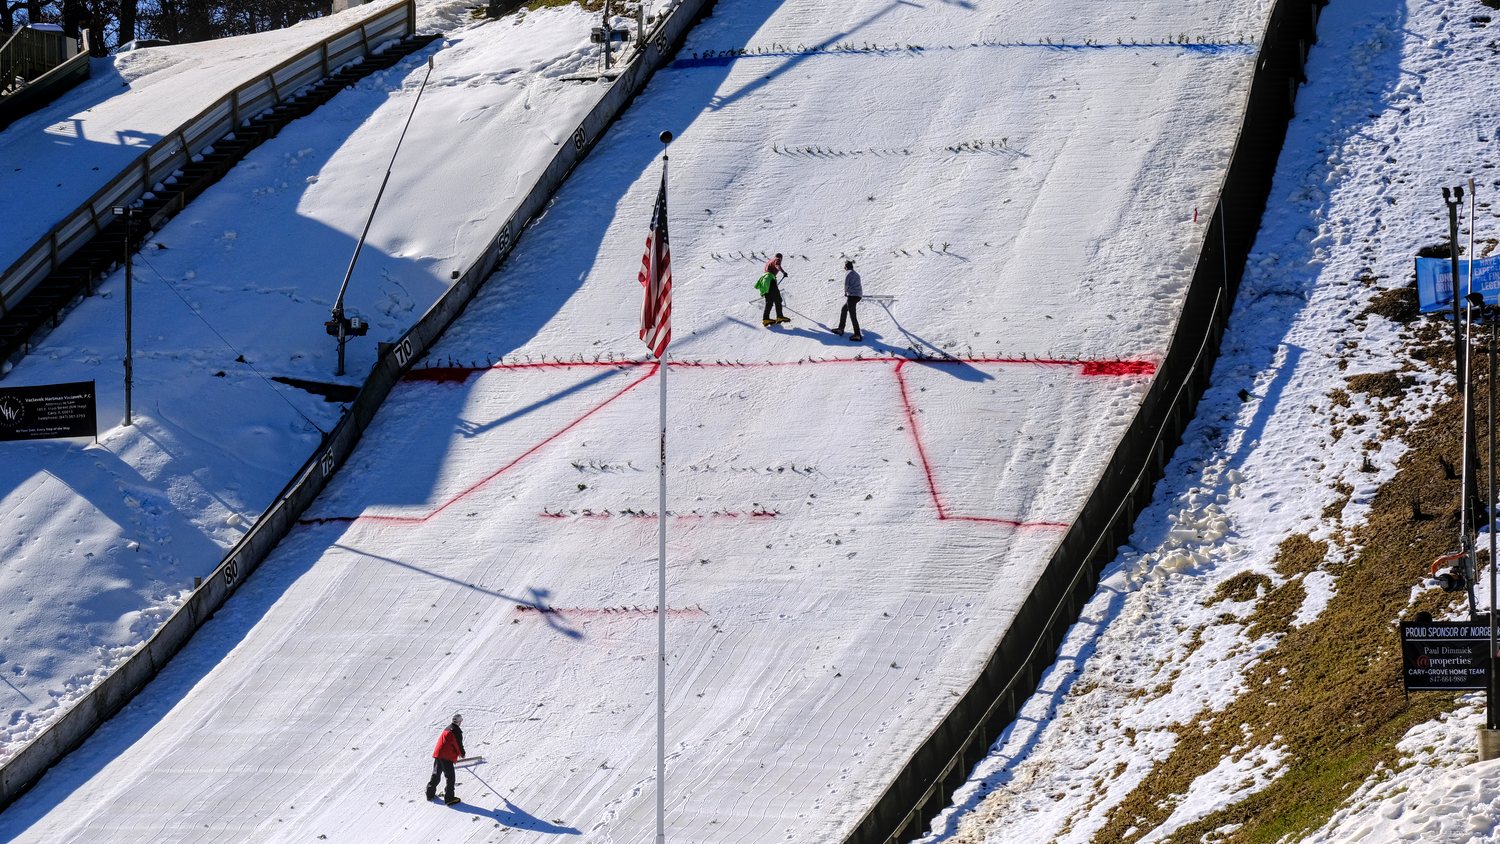 Workers preparing the hill for the 118th Annual Norge Ski Club Winter Tournament.